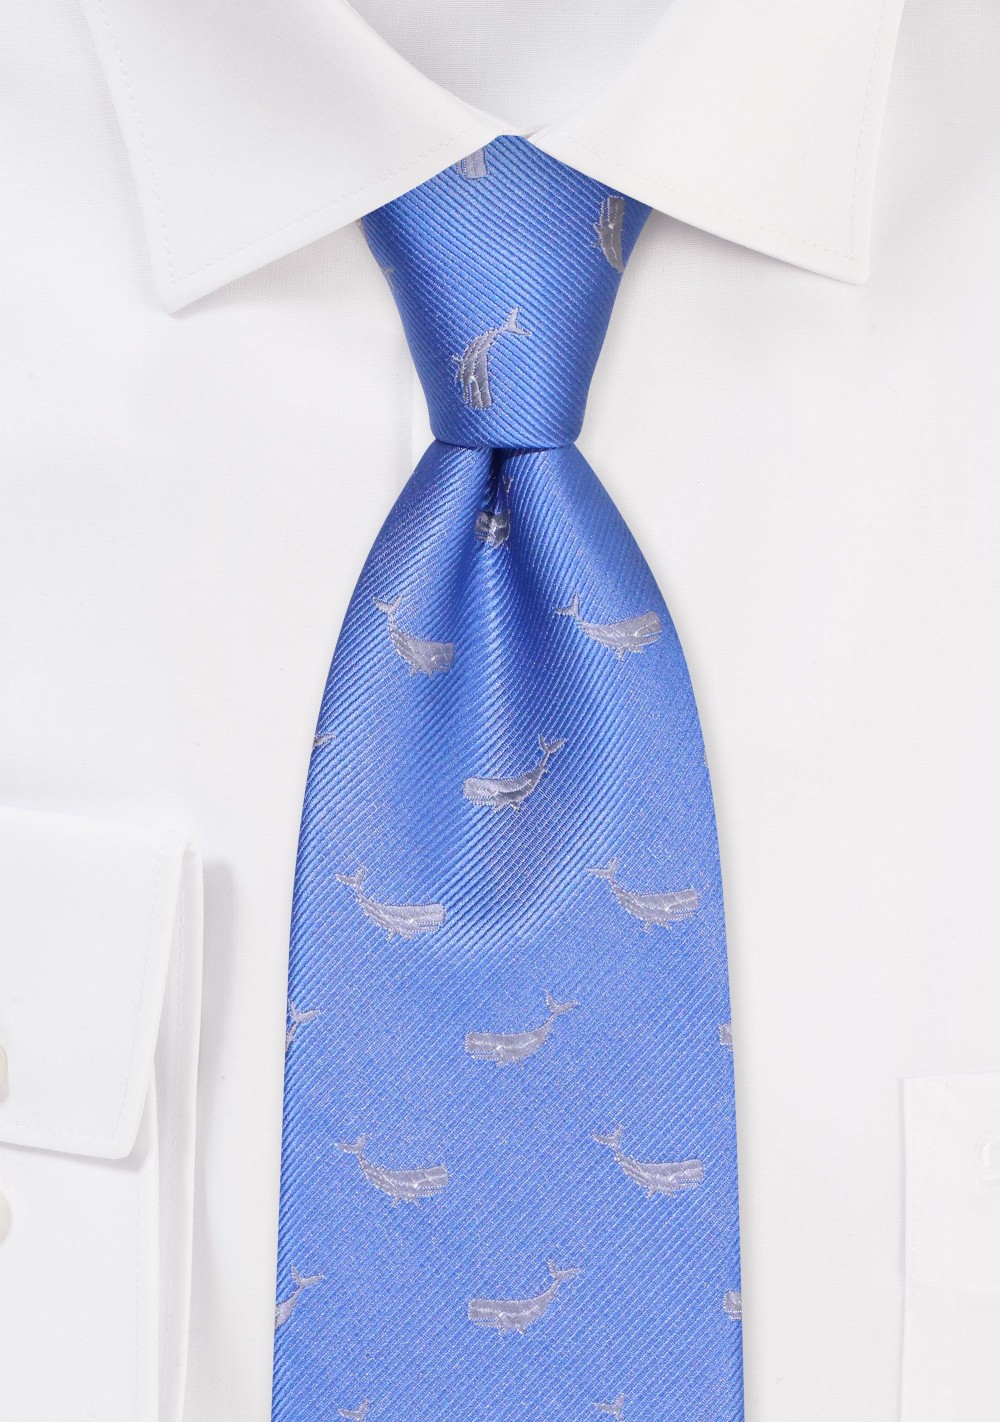 Royal Blue Tie with Embroidered Whales